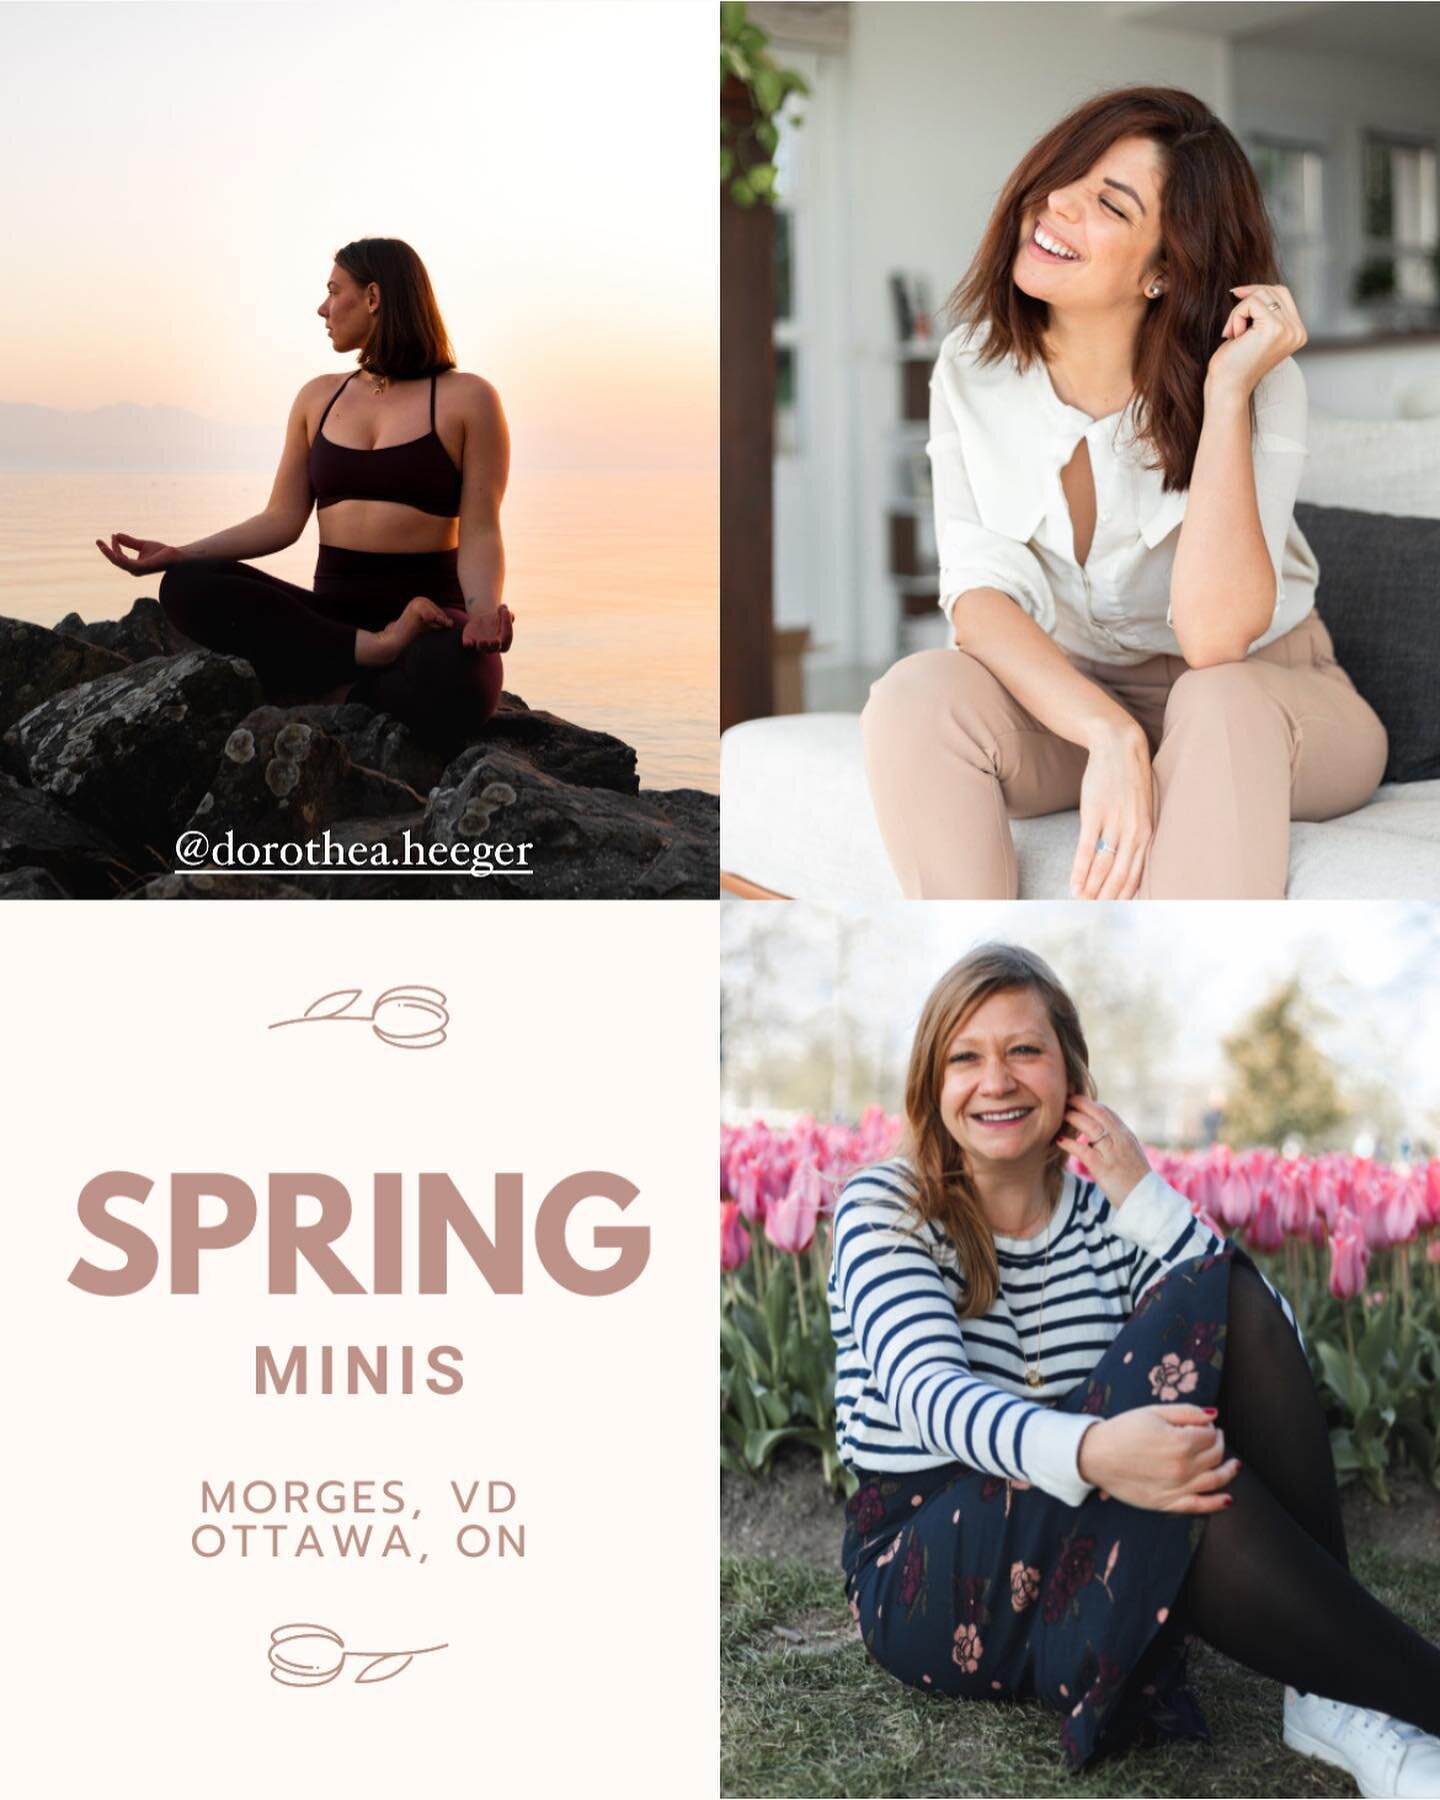 Spring minis are here 💐 Les mini-sessions de printemps sont l&agrave;!! 

Ottawa, Canada (at Fletcher Wildlife Gardens 🐝) - May 21st - 15 minutes - 10 photos. 
$149. 
50% deposit due upon booking. DM to book!

If you bring a friend, you both get 50